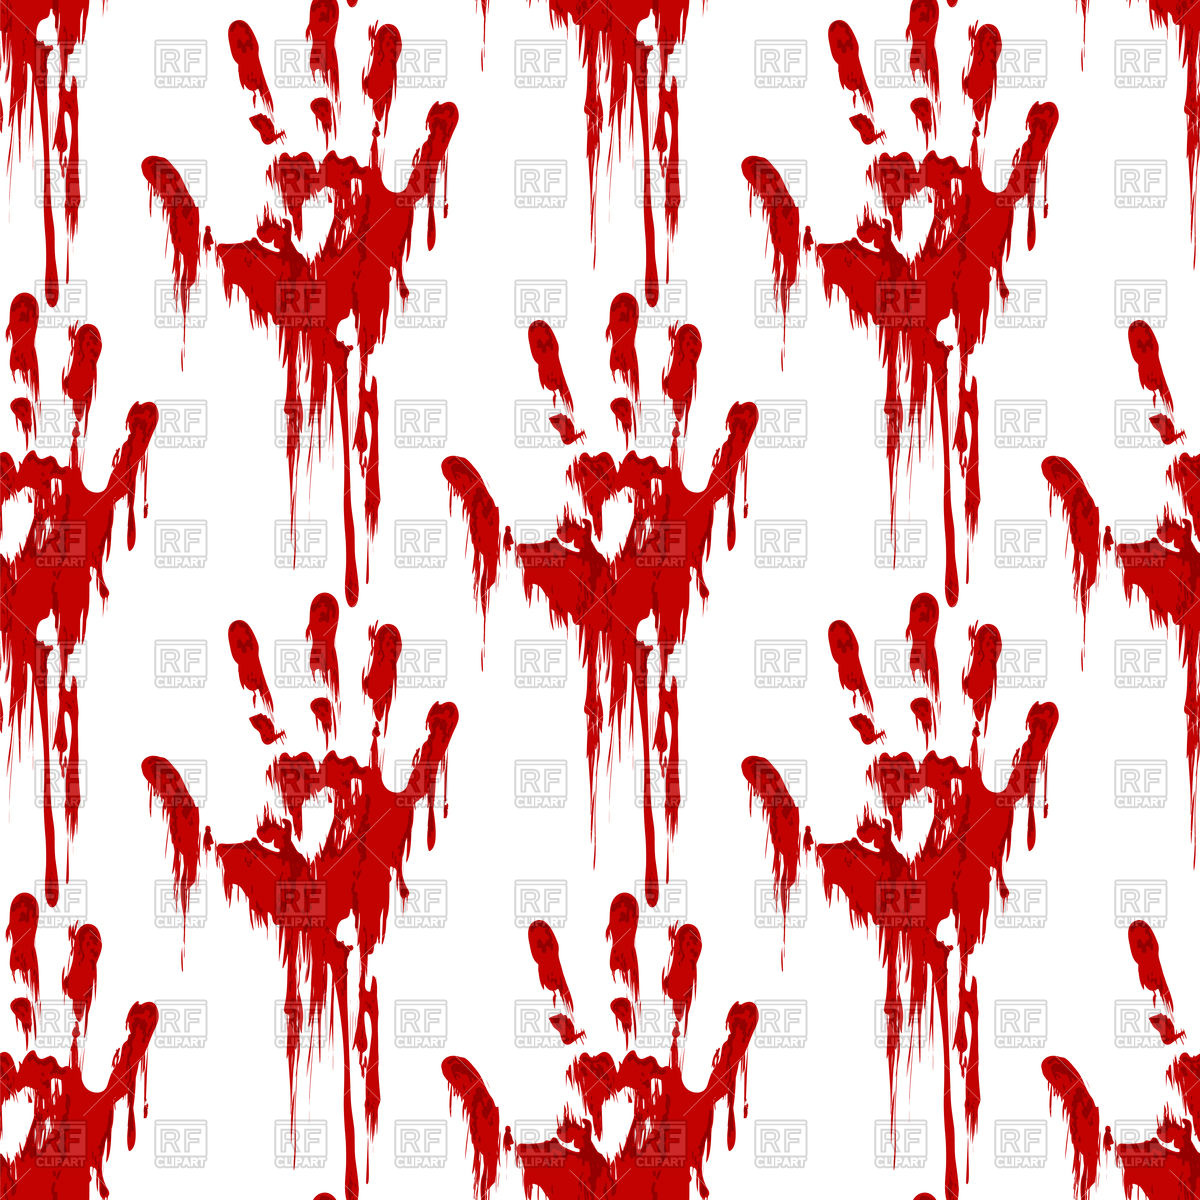 The Best Free Bloody Vector Images Download From 81 Free Vectors Of